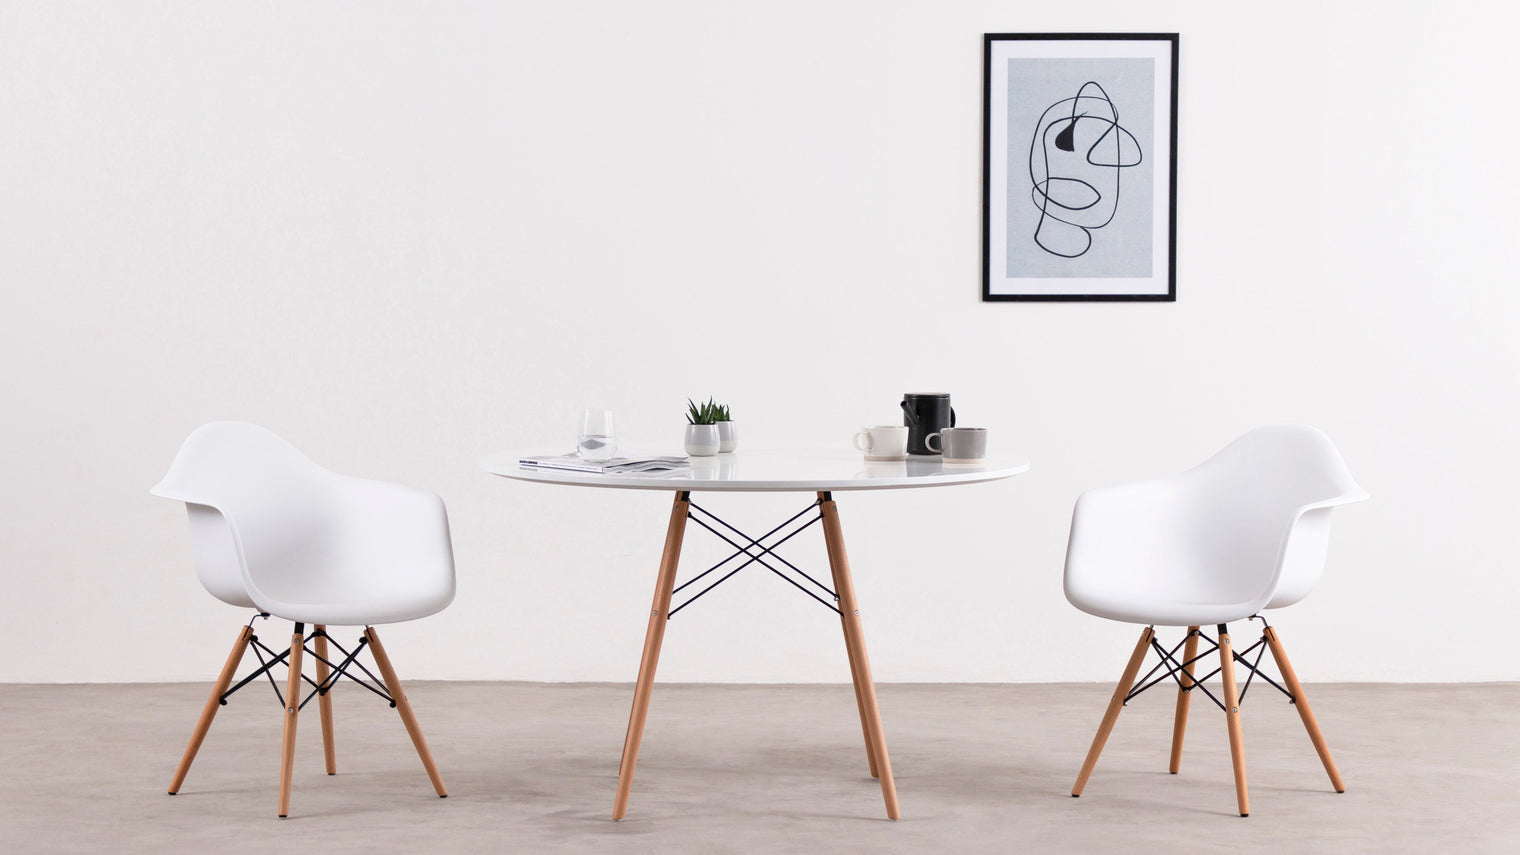 The perfect dining chair|Specifically designed for comfortable dining, the Flynn Armchair is an integral part of our molded chair collection. Arguably one of the most comfortable, ergonomic chairs for daily dining, this customizable seating solution features a wood and steel base and expertly curved shell/seat.
